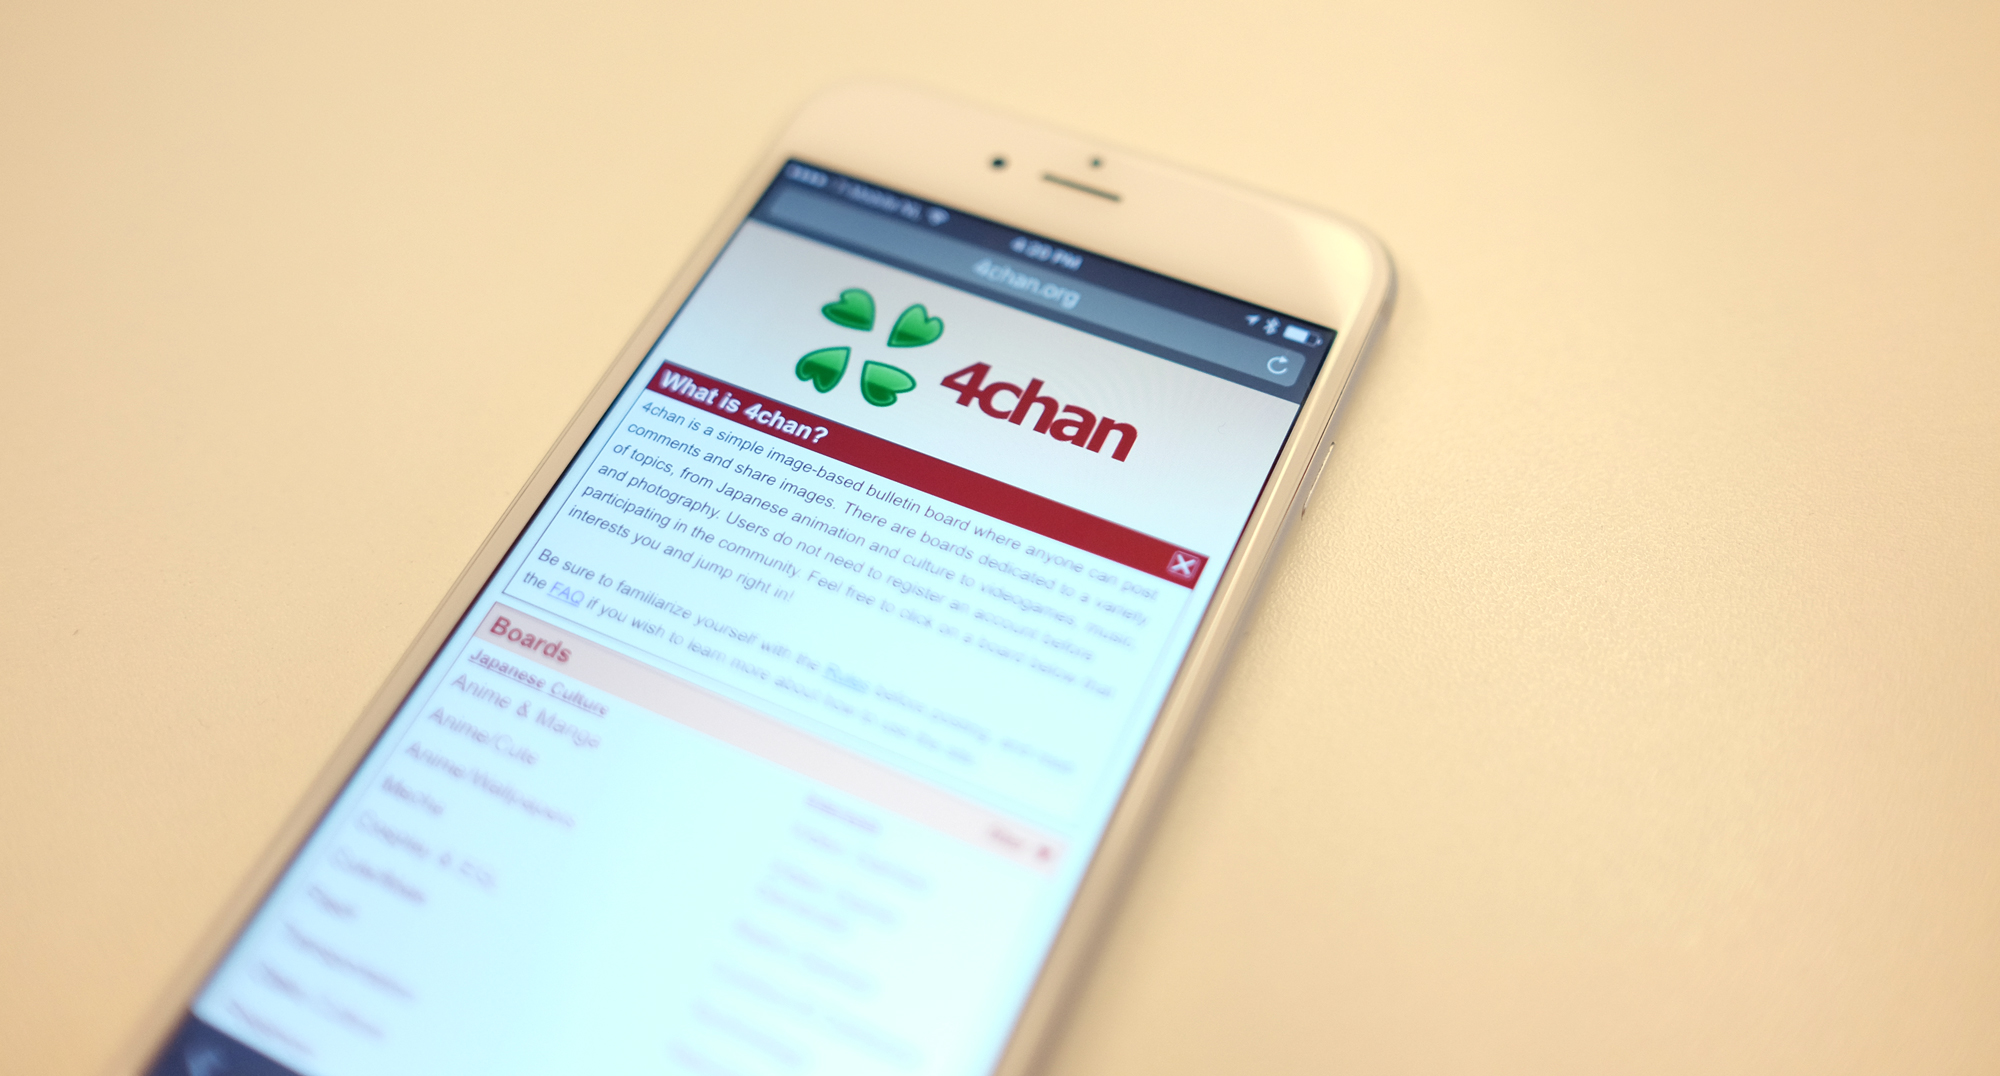 4chan has been sold to 2channel's founder after 12 years under 'moot'